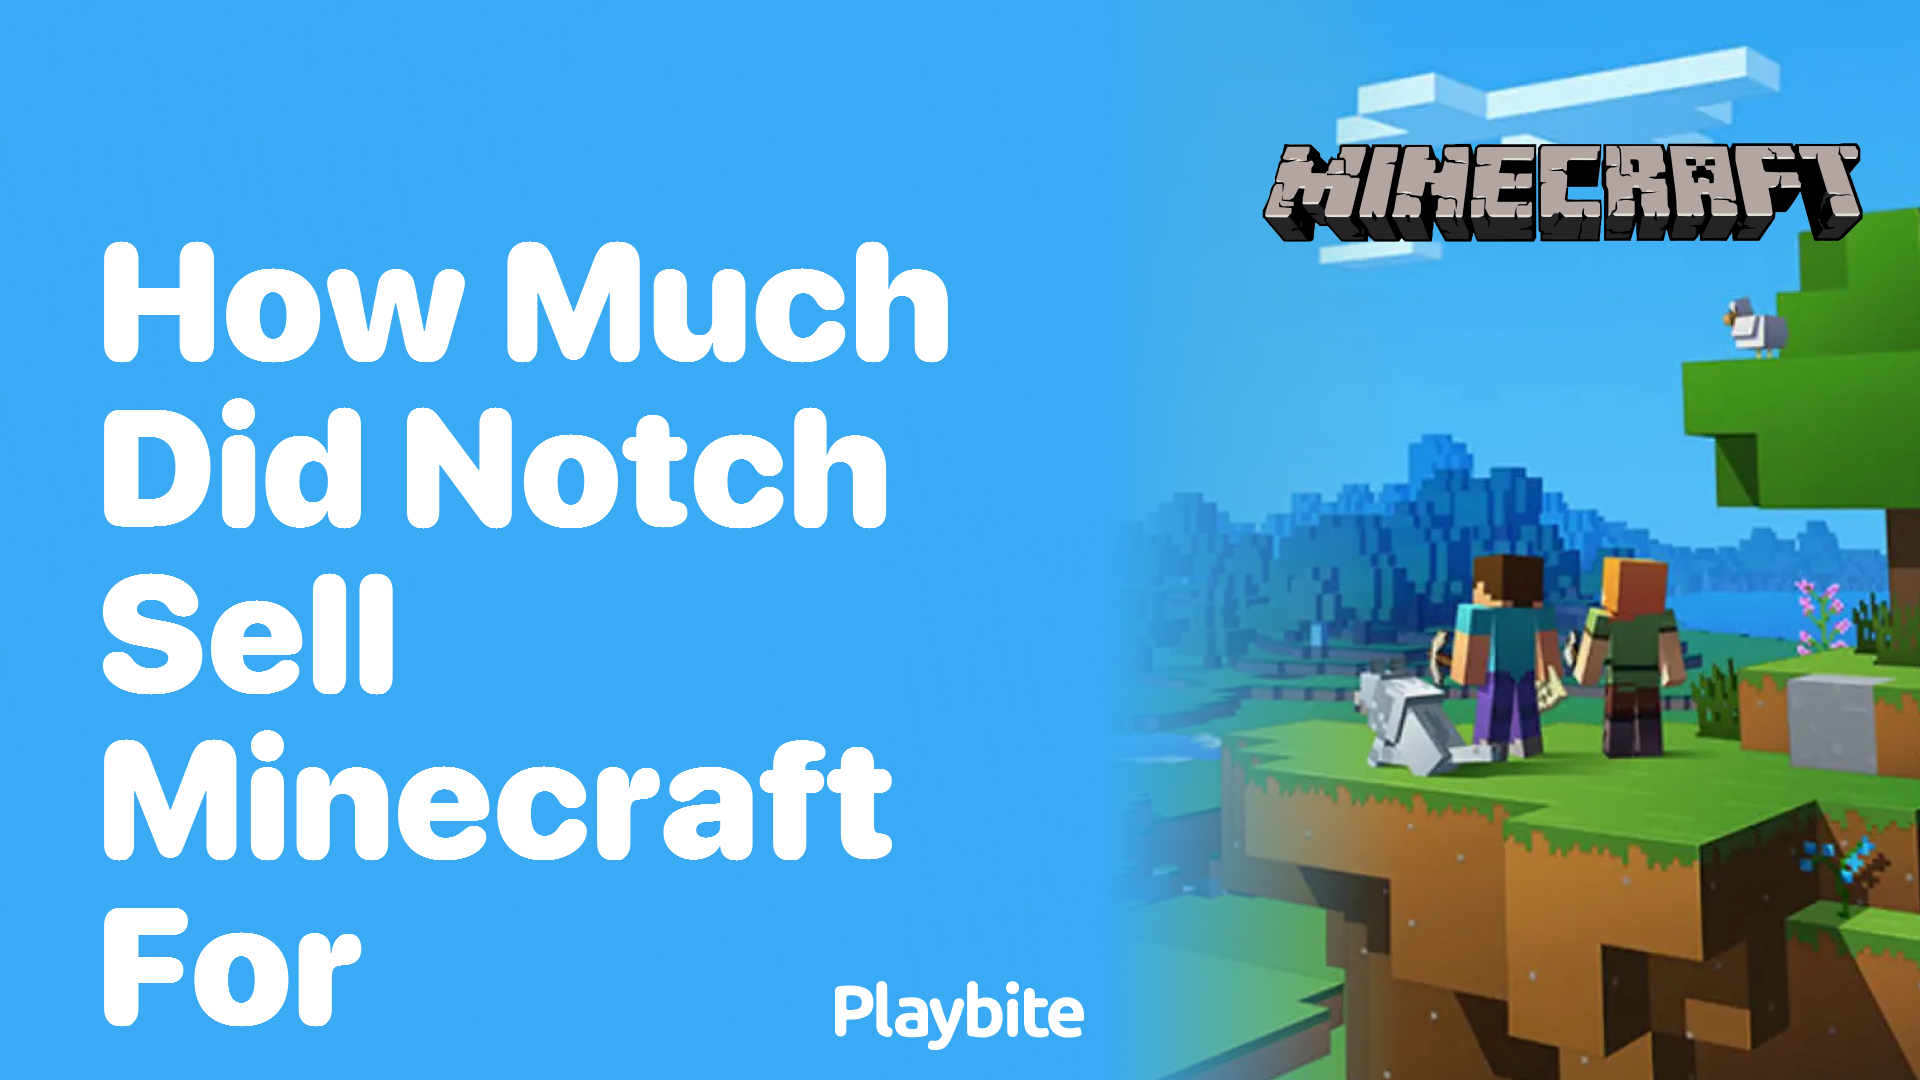 How Much Did Notch Sell Minecraft For?